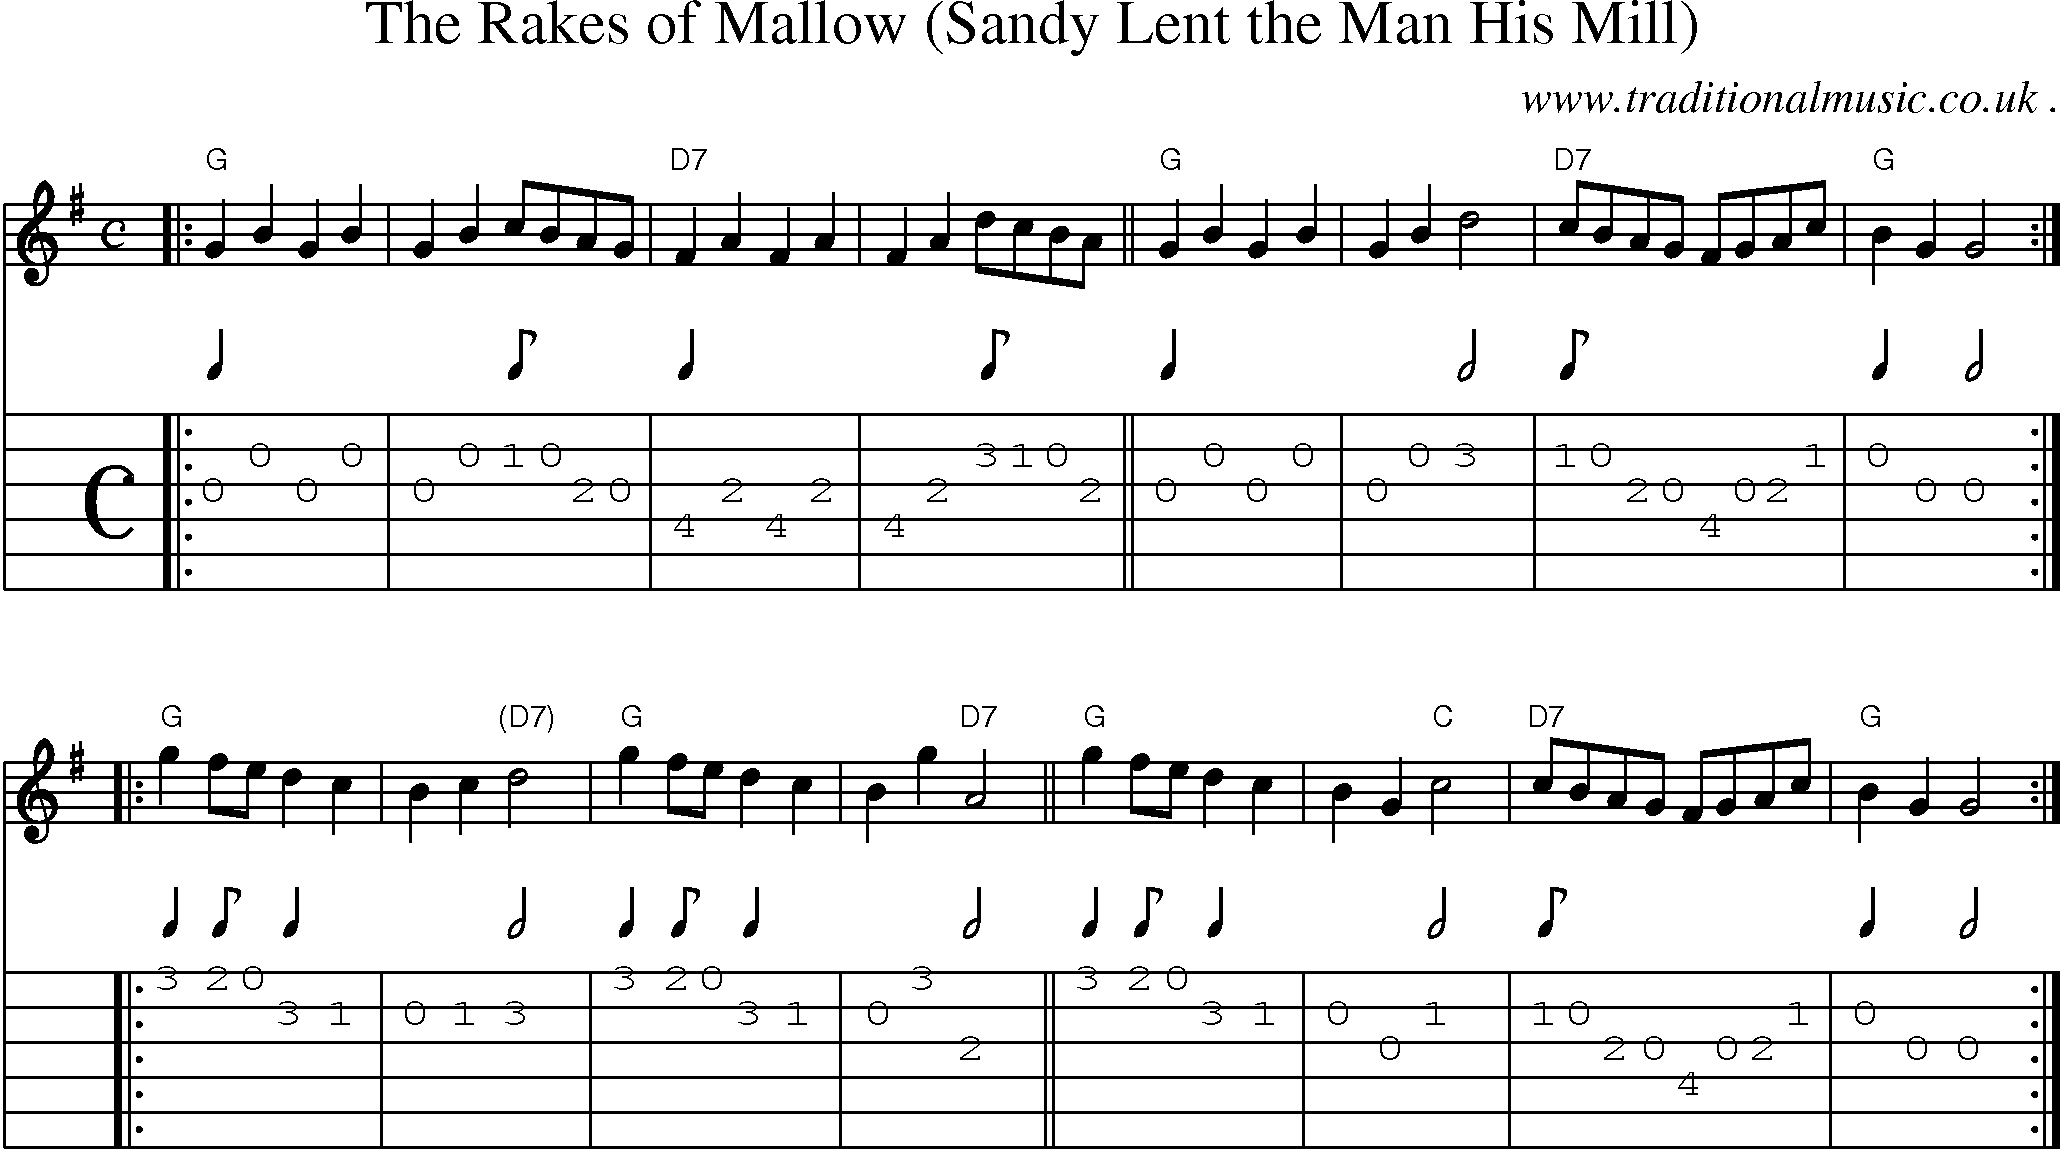 Sheet-Music and Guitar Tabs for The Rakes Of Mallow (sandy Lent The Man His Mill)